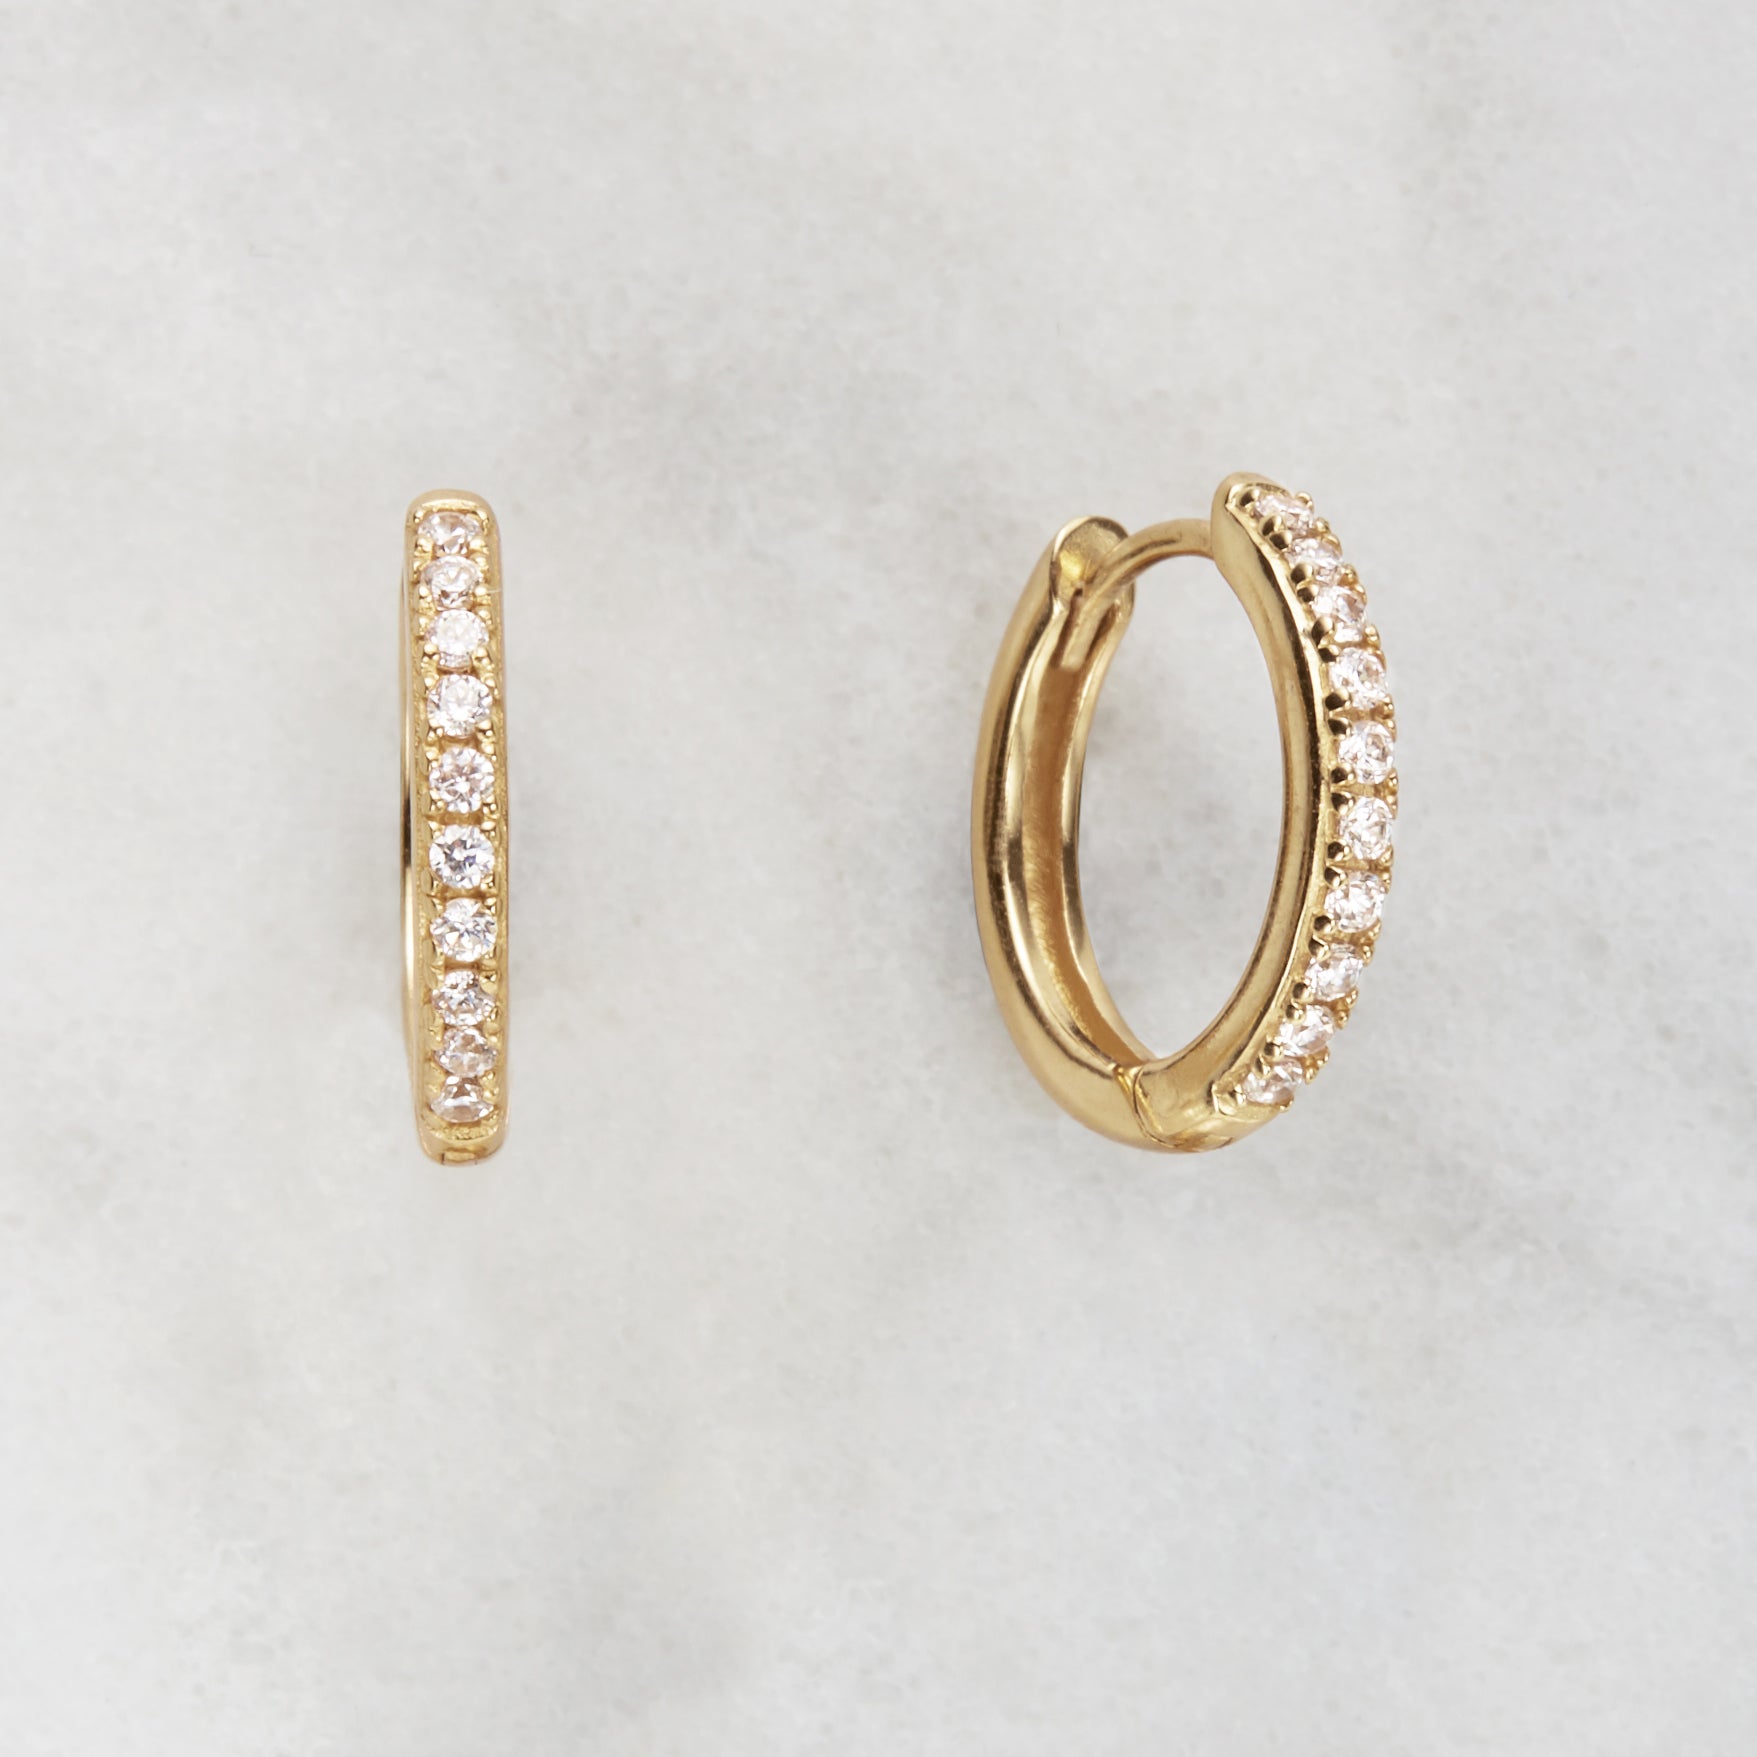 Gold diamond style large hoop earrings with a marble background